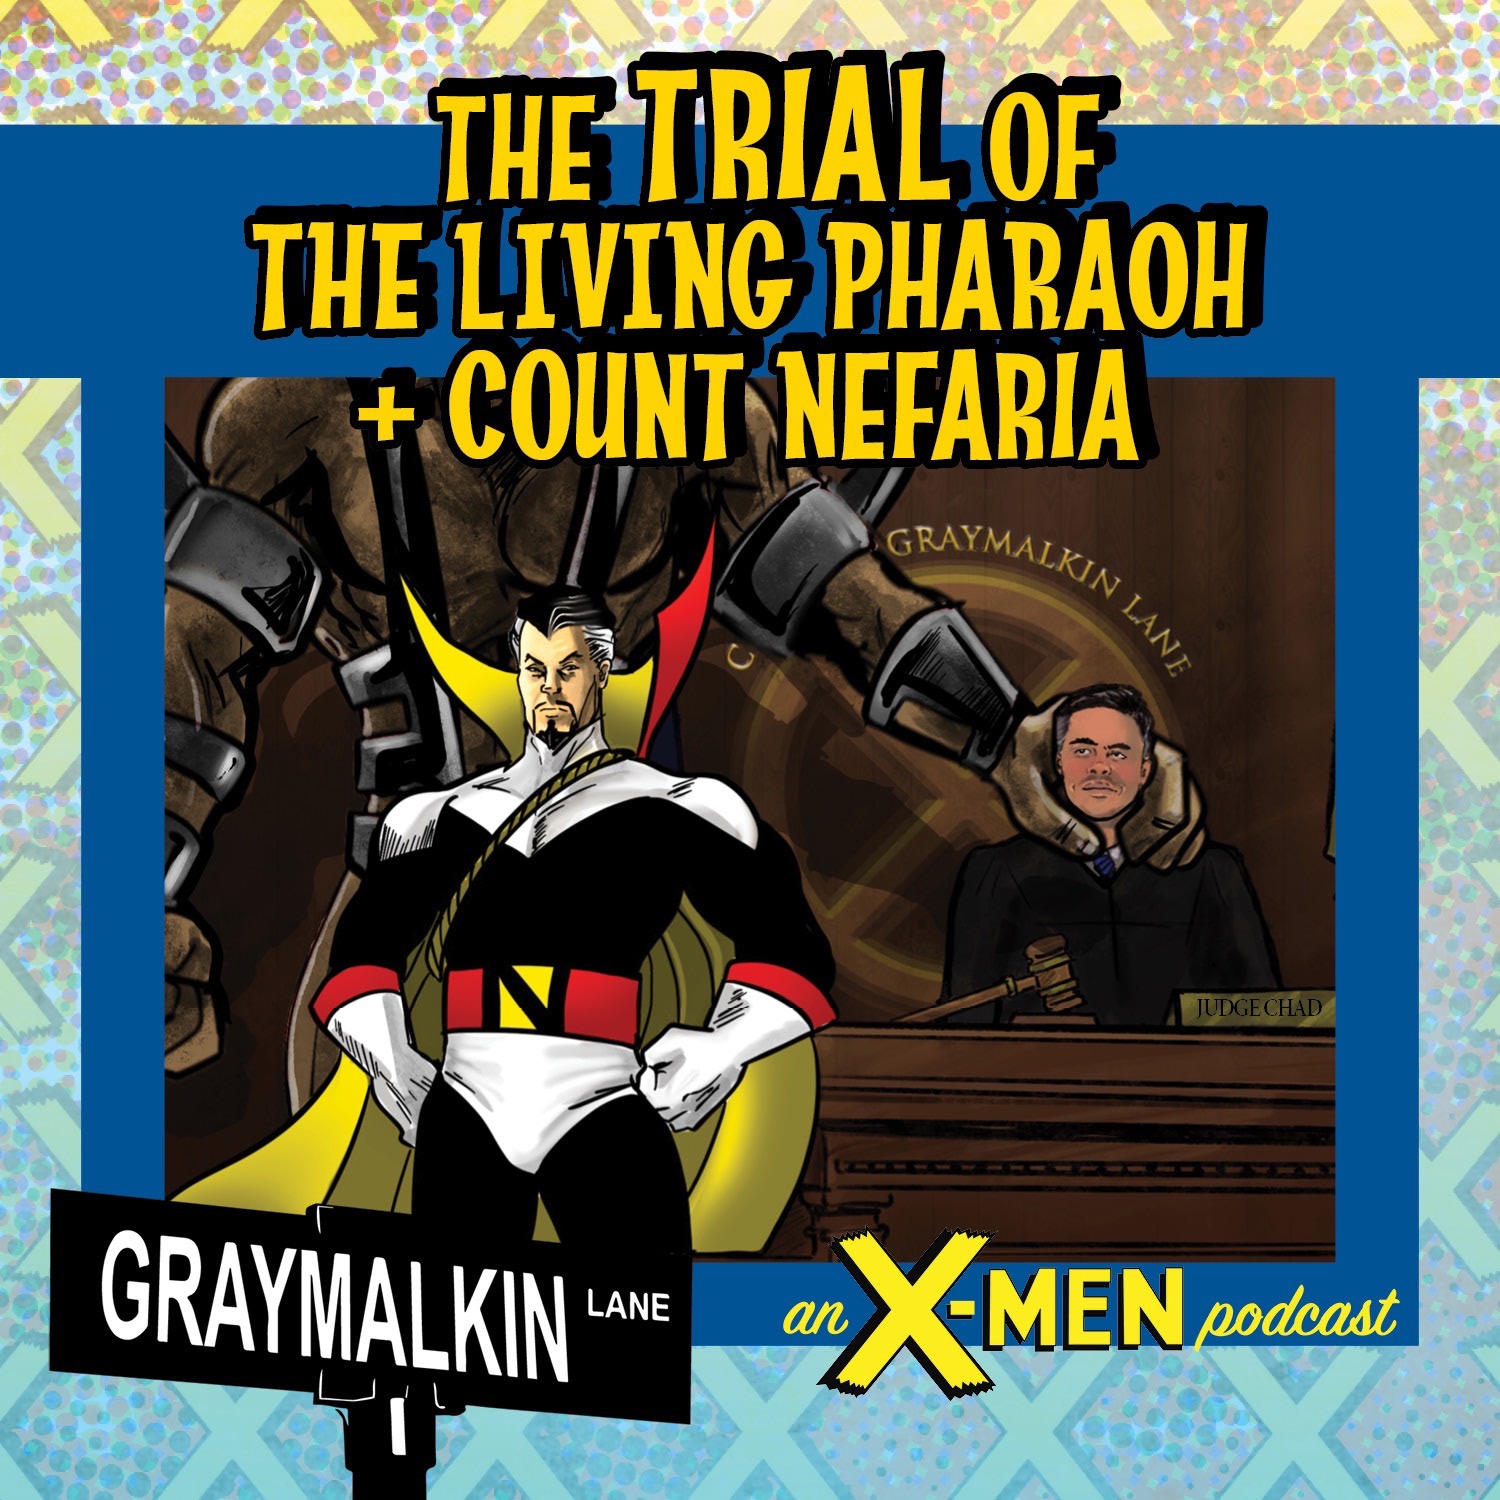 the Trials of Ahmet Abdol (the Living Pharaoh) and Count Luchino Nefaria! Featuring Hussein Rashid, Daryl Lawrence, Rob Salerno, Mike Moon, and Steve Duda!